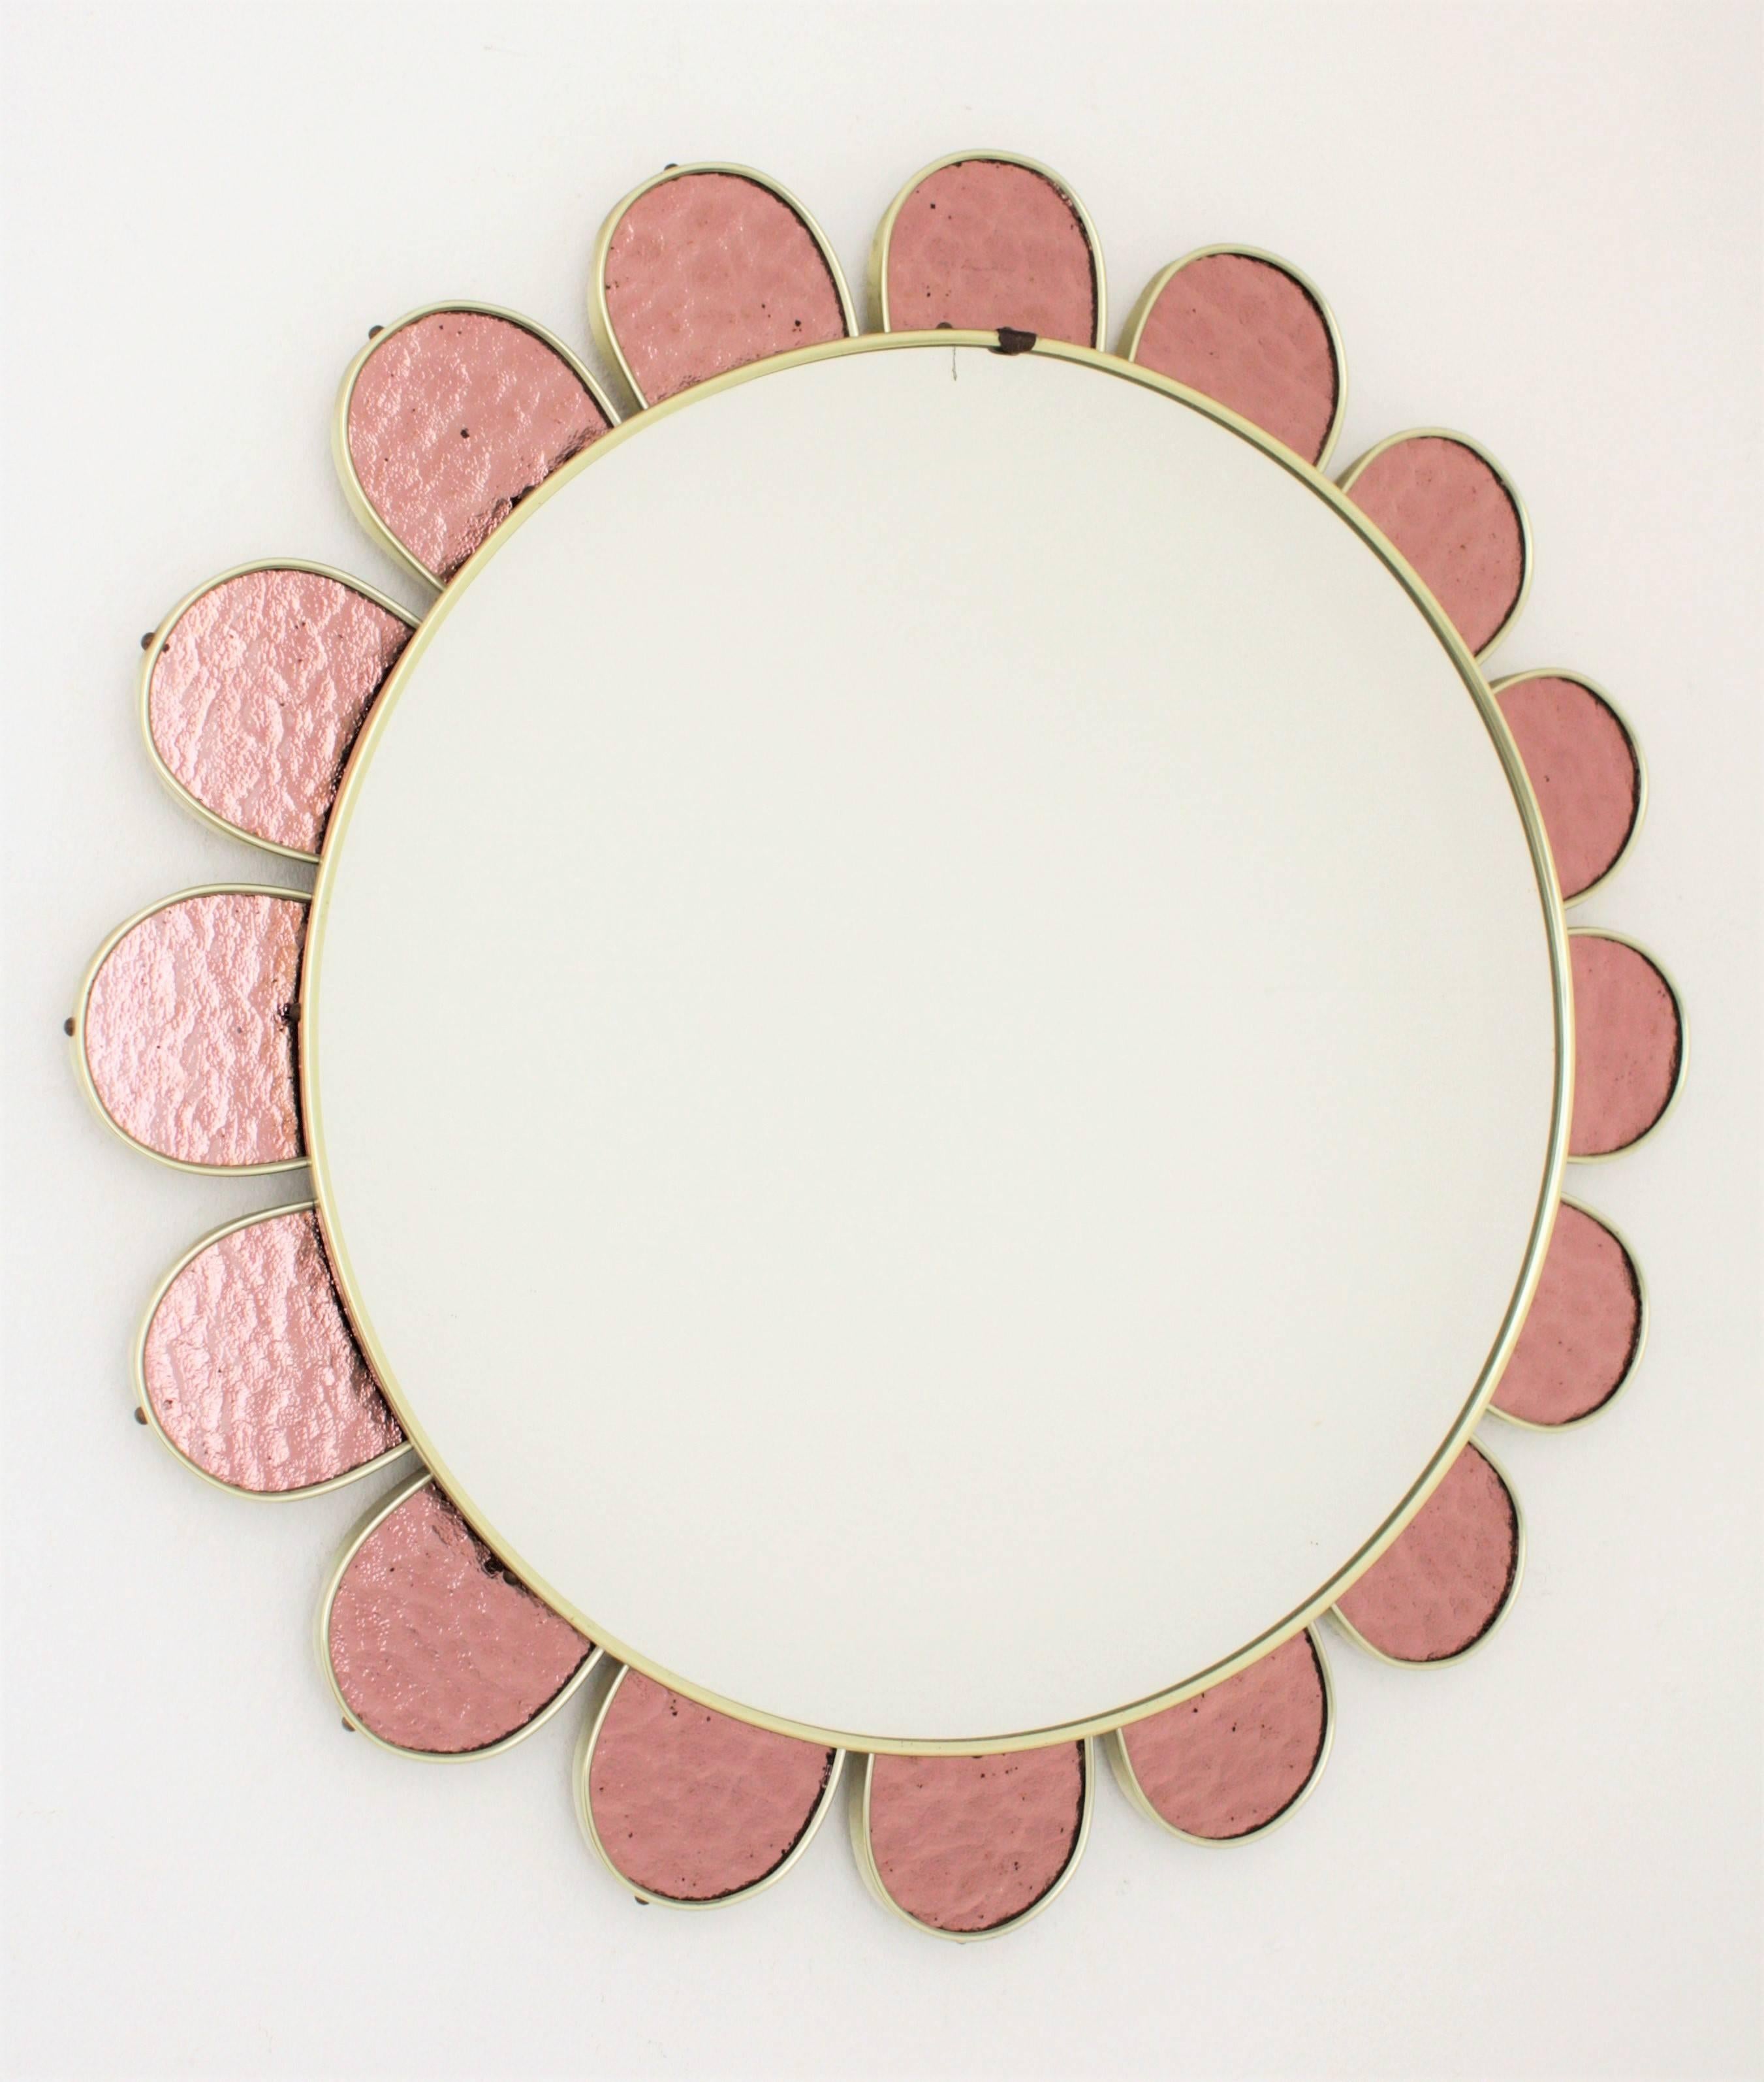 Flower burst mirror with petals frame made with pieces of iridescent pink glass.